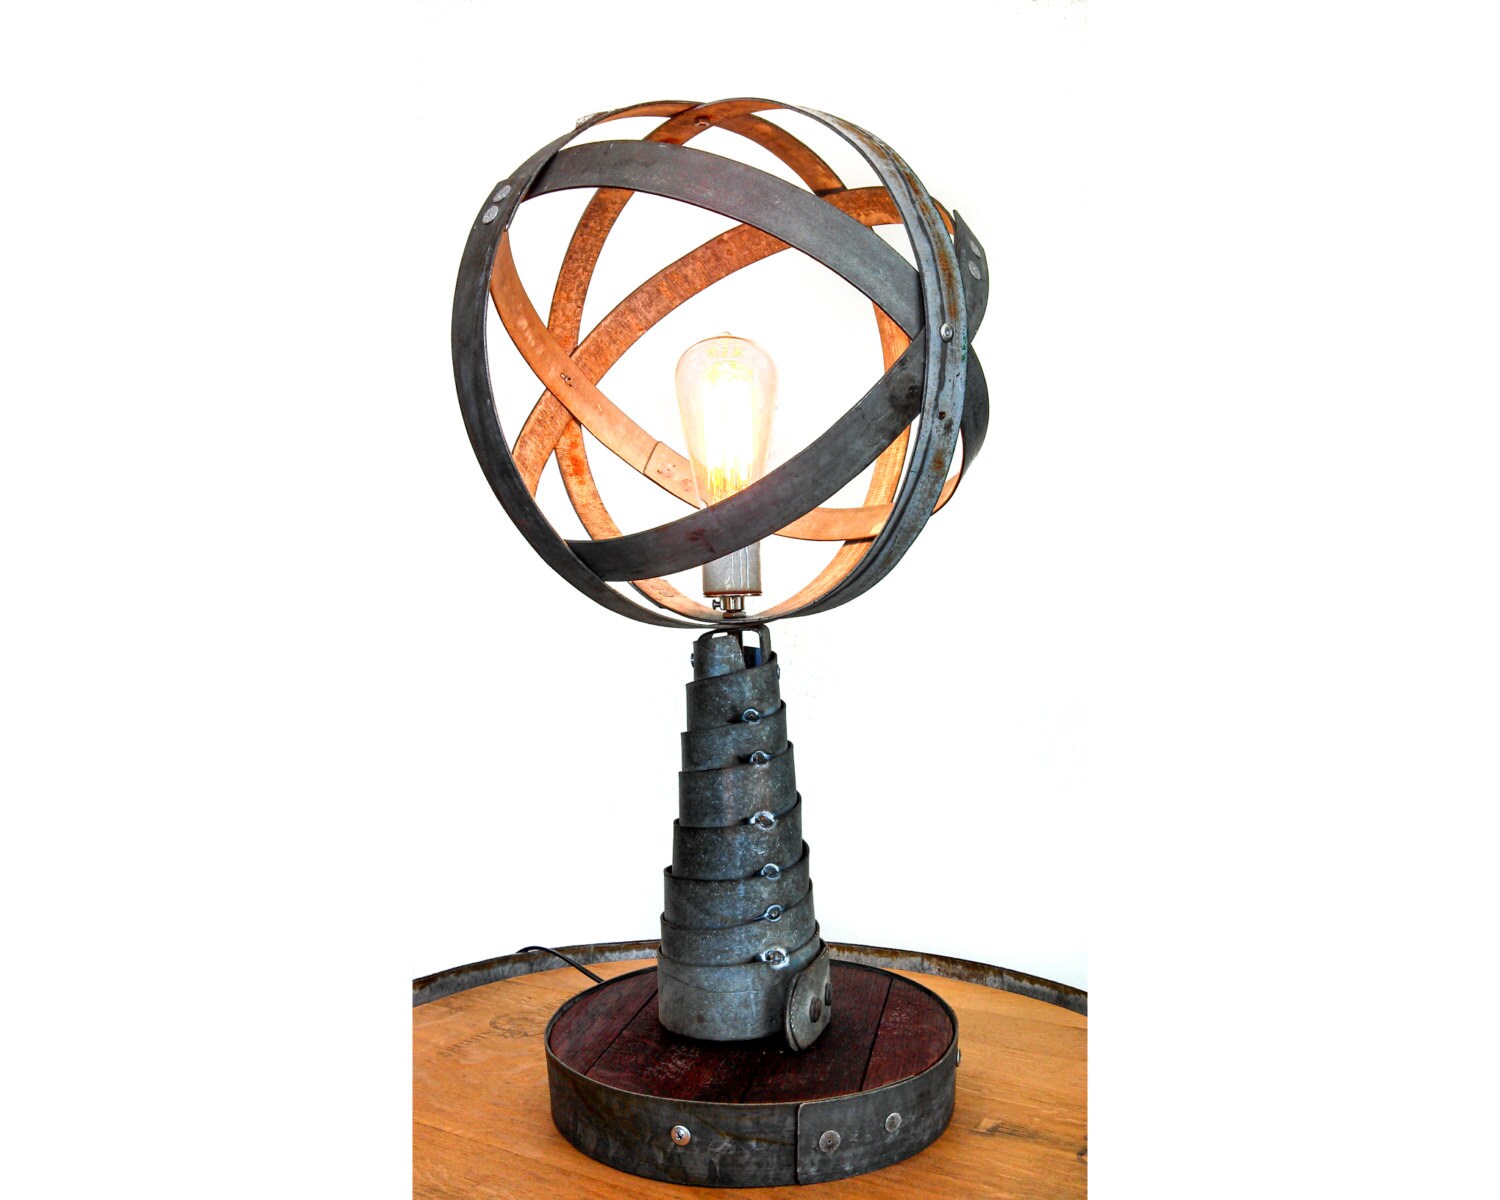 Wine Barrel Desk Lamp - Mahaian - Made from retired CA wine barrel rings and staves. 100% Recycled!